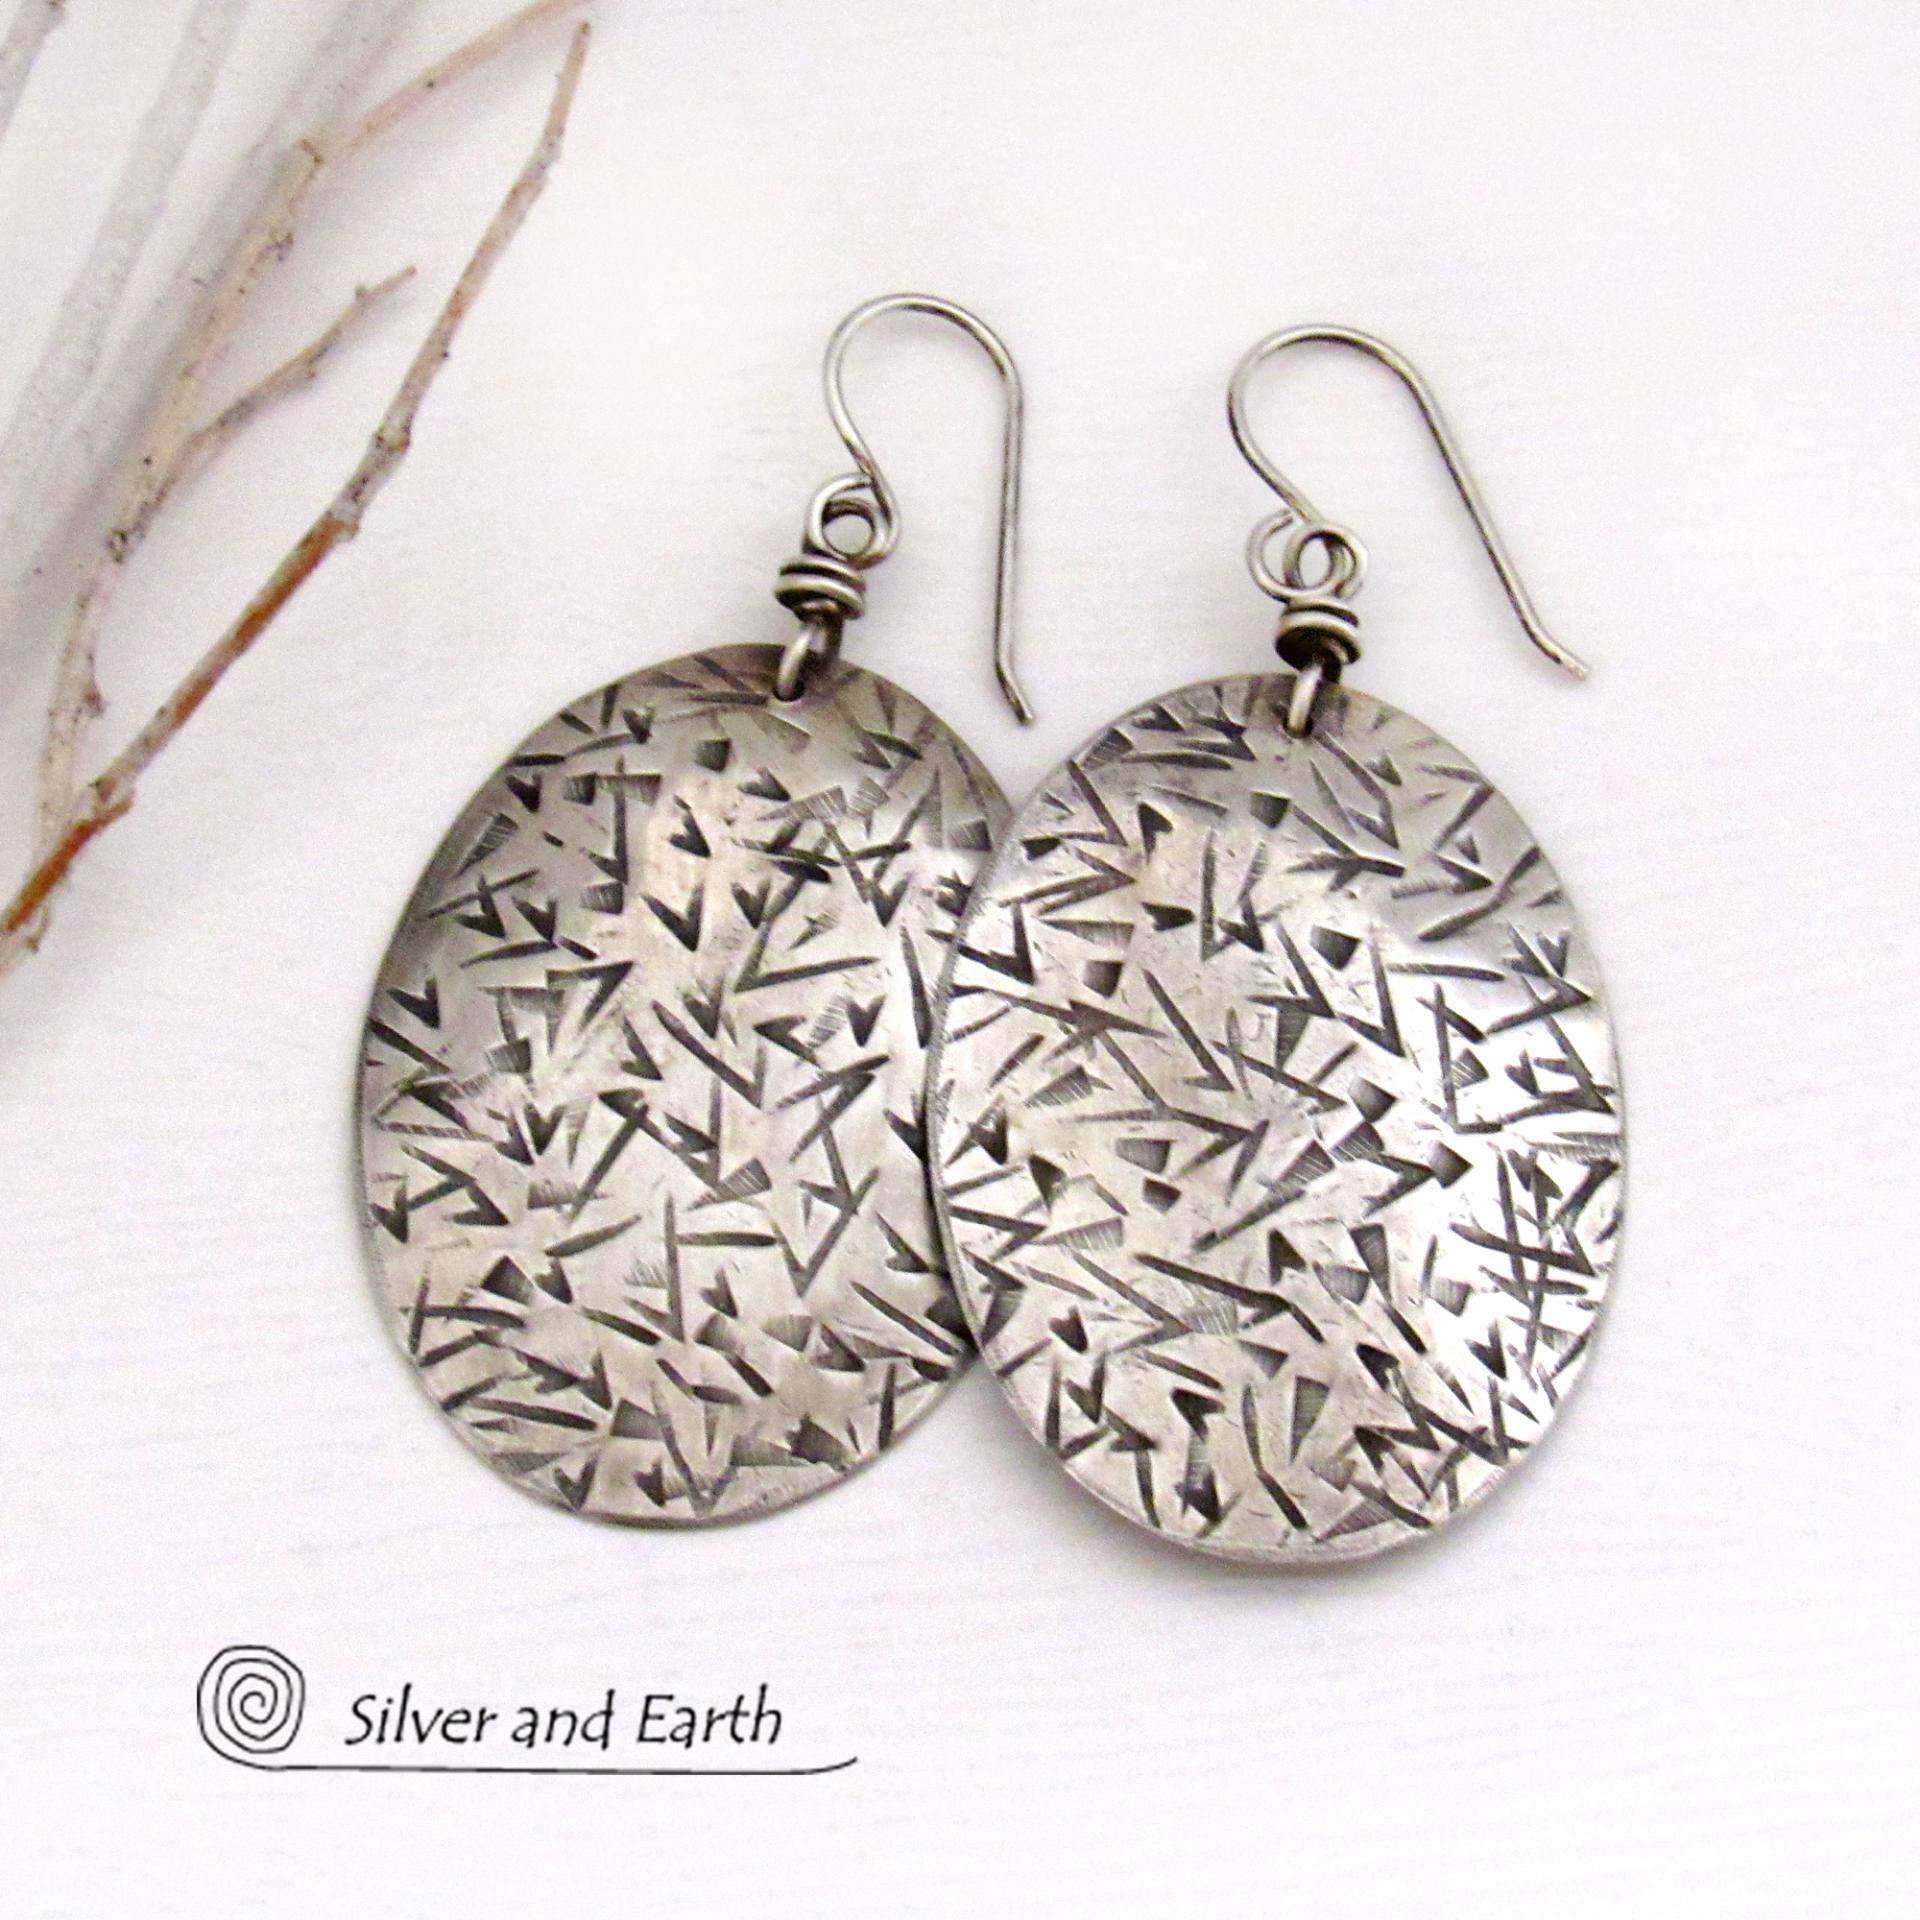 These large sterling silver dangle earrings have a modern, contemporary feel. Perfect "go to" earrings that can be worn everyday with all wardrobe types.